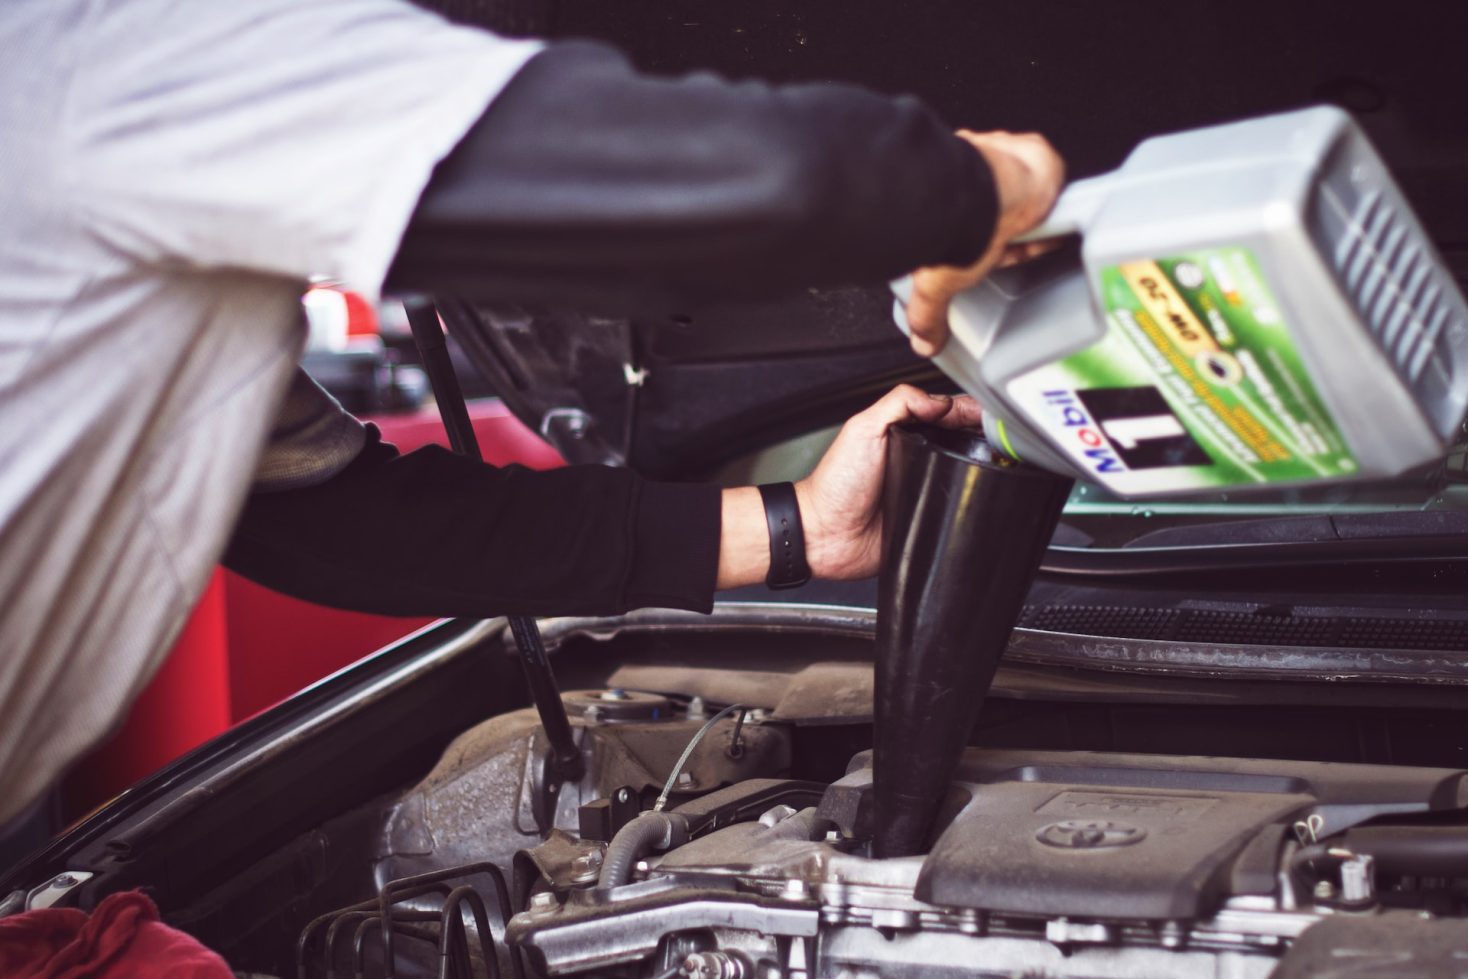 When should I change my engine oil?